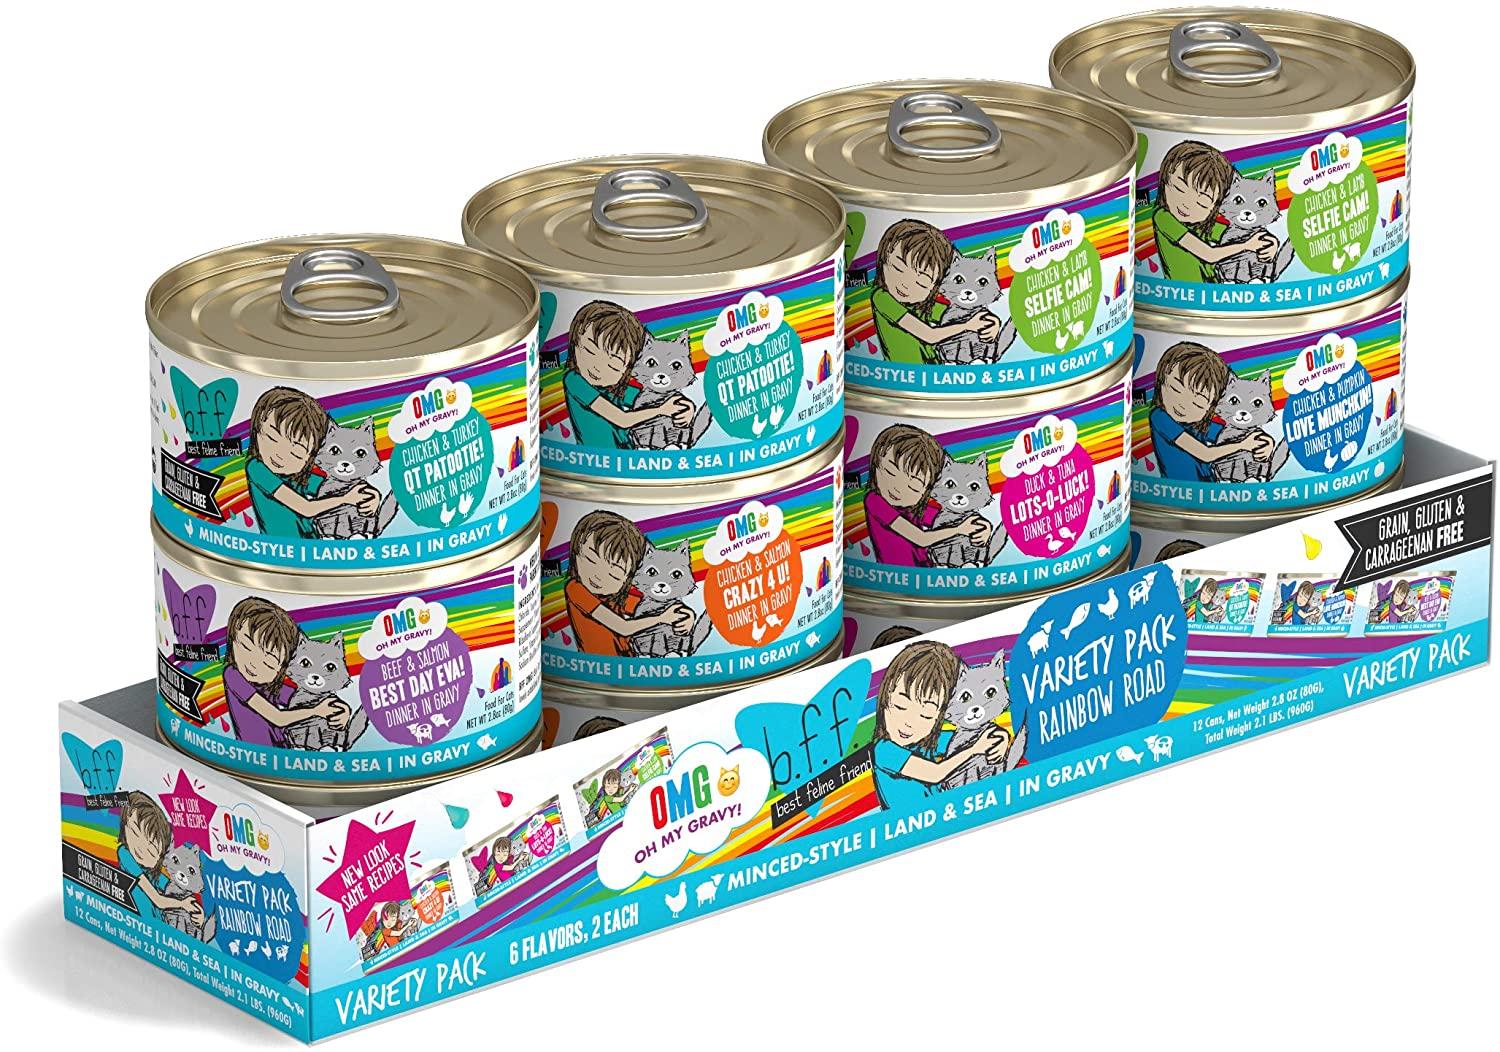 12 Weruva BFF OMG Rainbow Road Variety Pack Canned Cat Food for 7.74